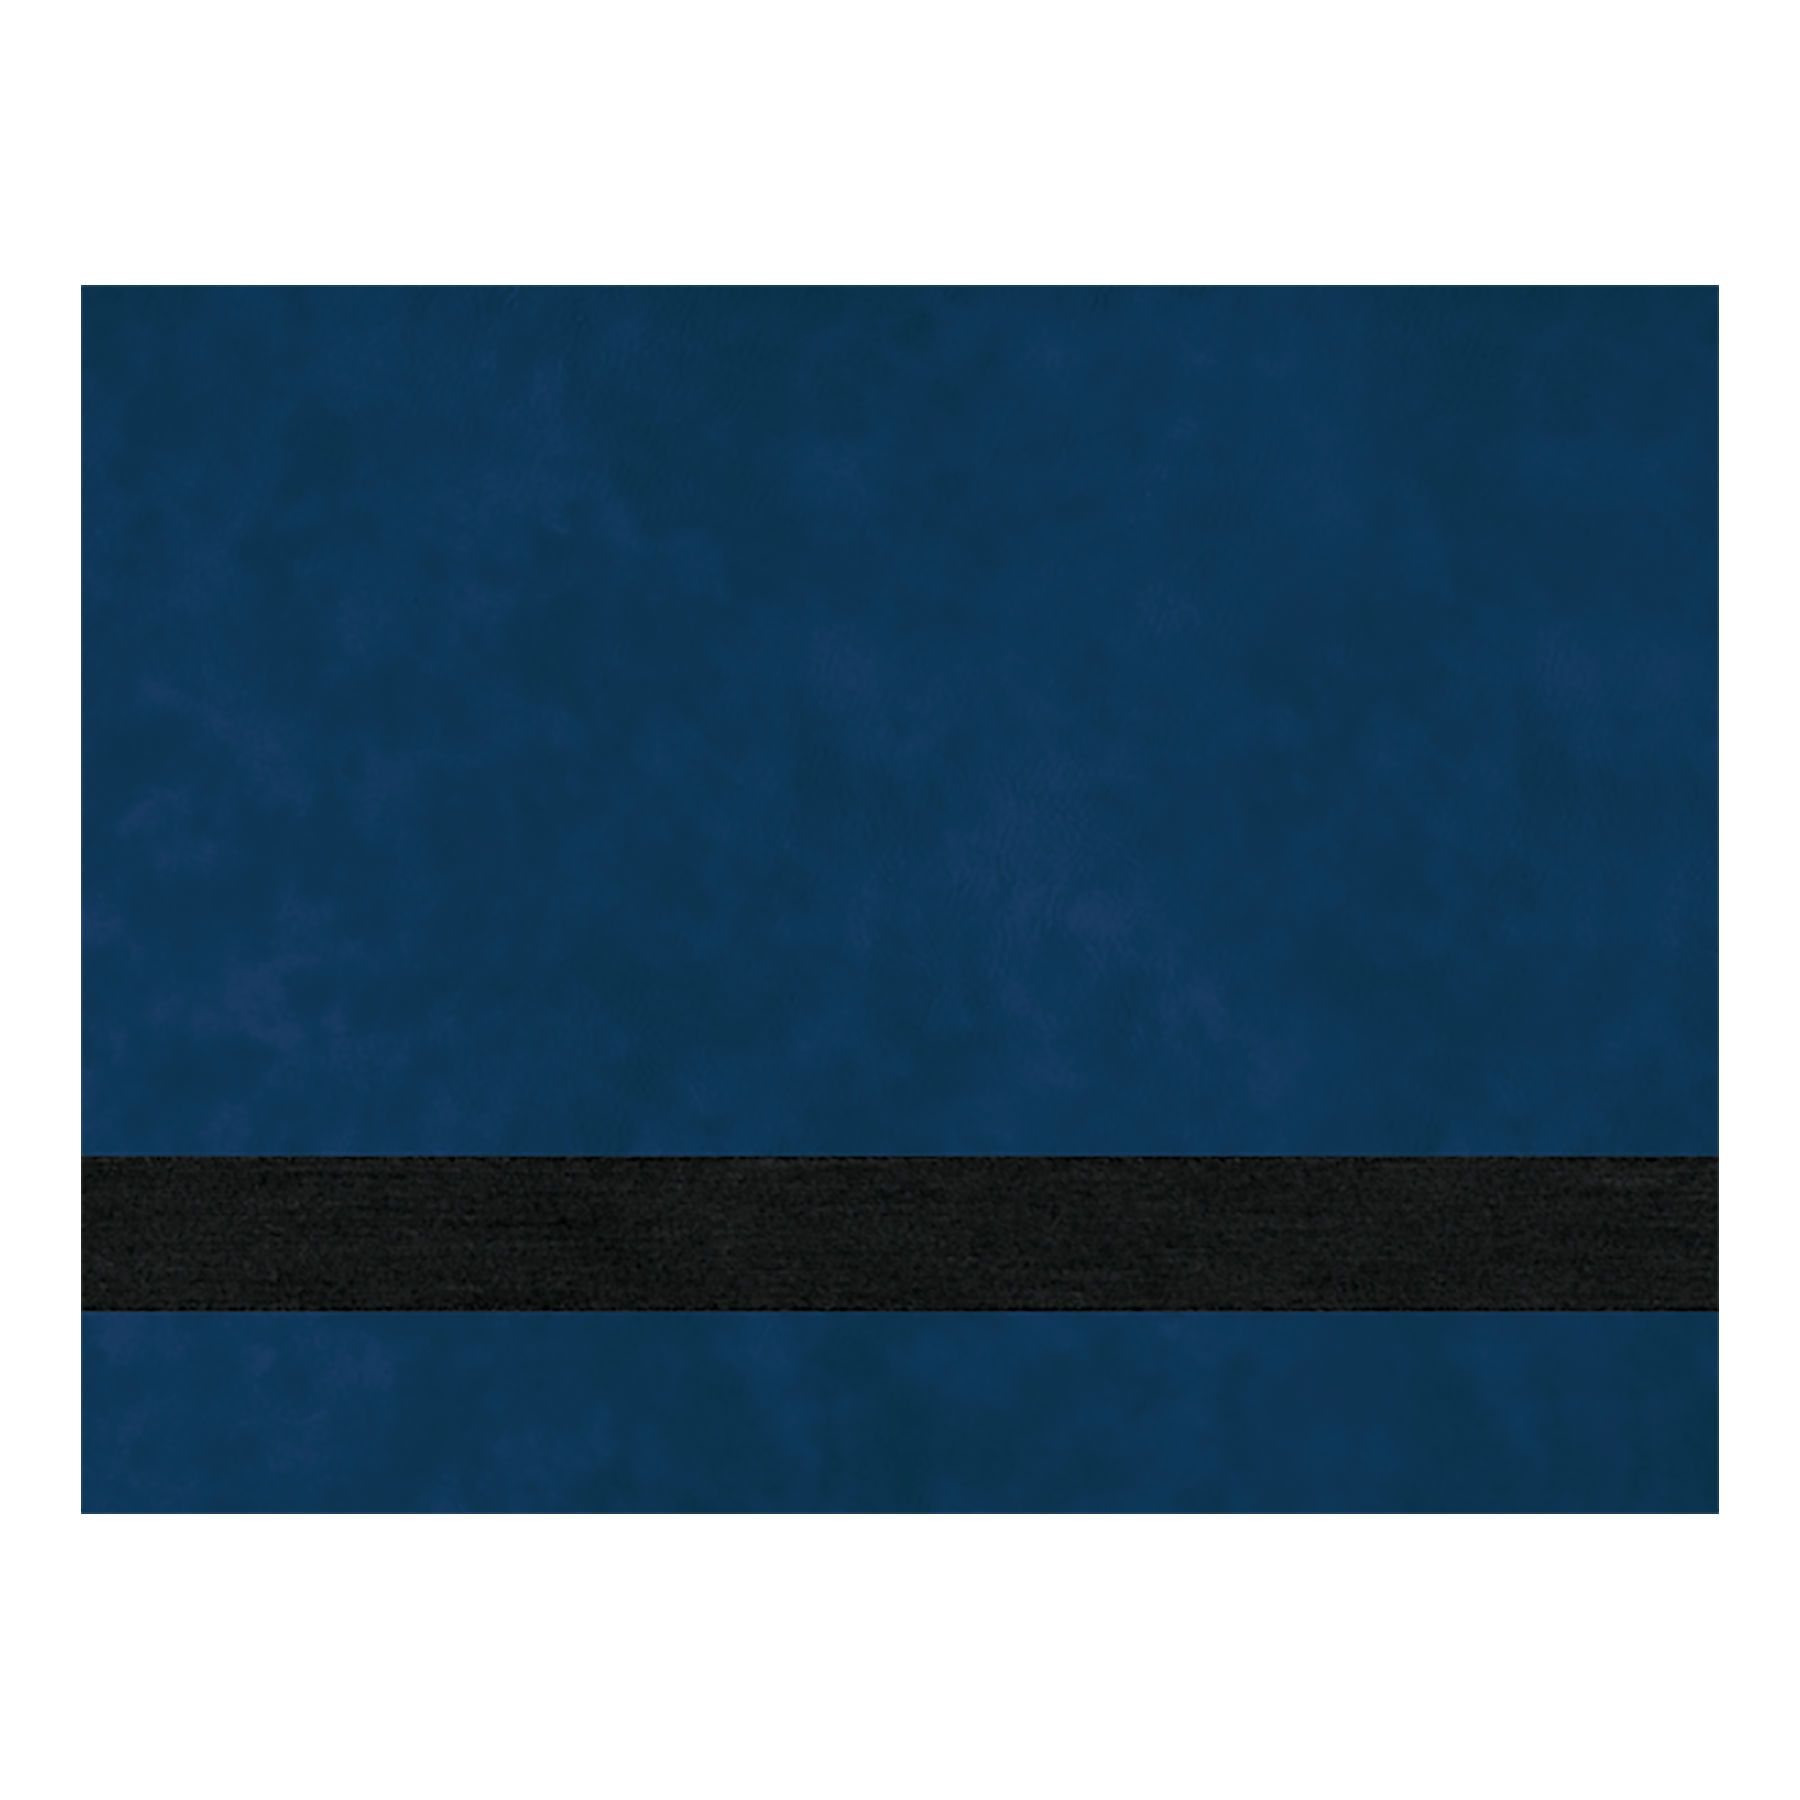 PRE-ORDER! Full Size Laserable Leatherette Sheet Stock, Epilog Fusion Edge Laser Engravers (Available Jan. 2022) Engraving Supplies Craftworks NW Fusion Edge 24 (24" x 24") Blue/Black 